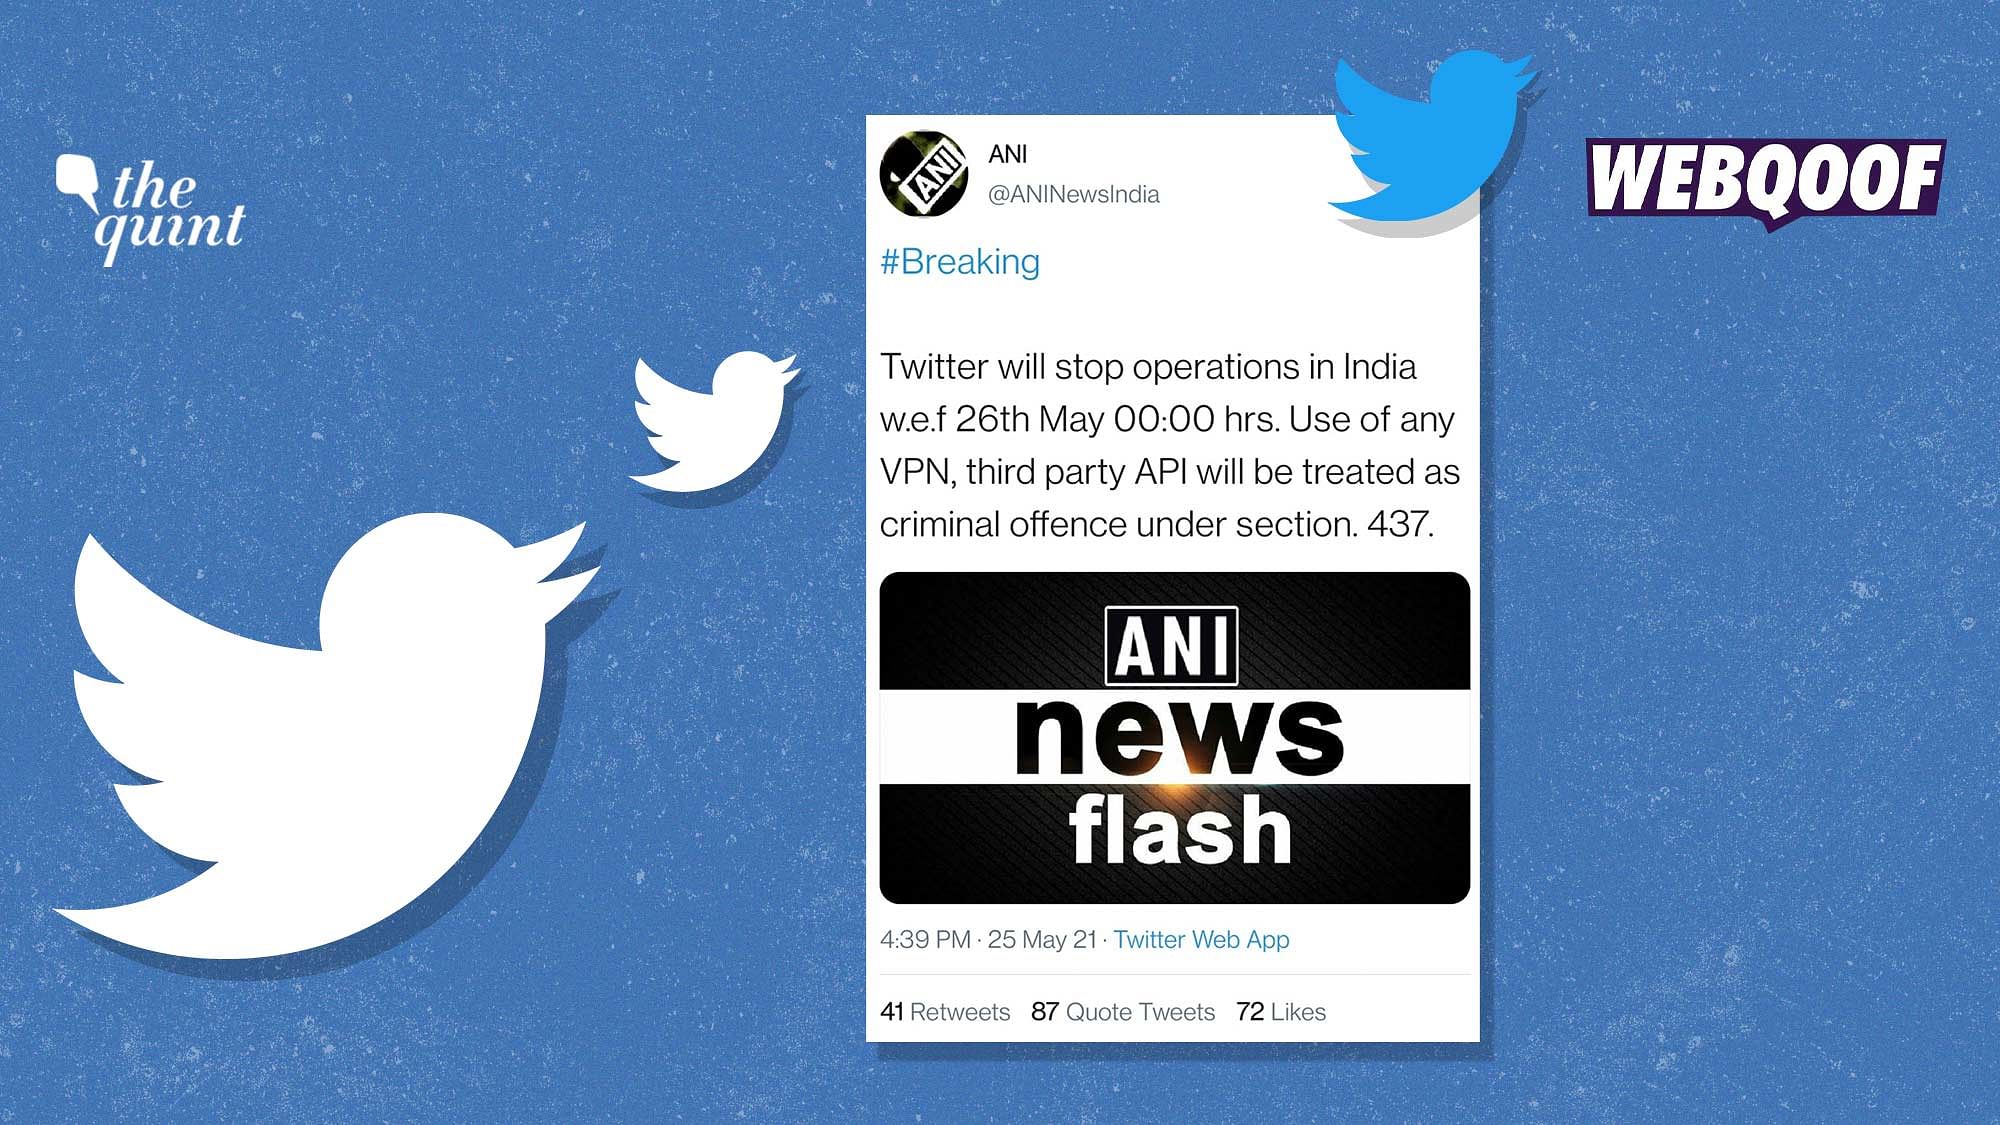 An imposter account of ANI falsely claimed that Twitter will stop its operation in India from Wednesday, 26 May.